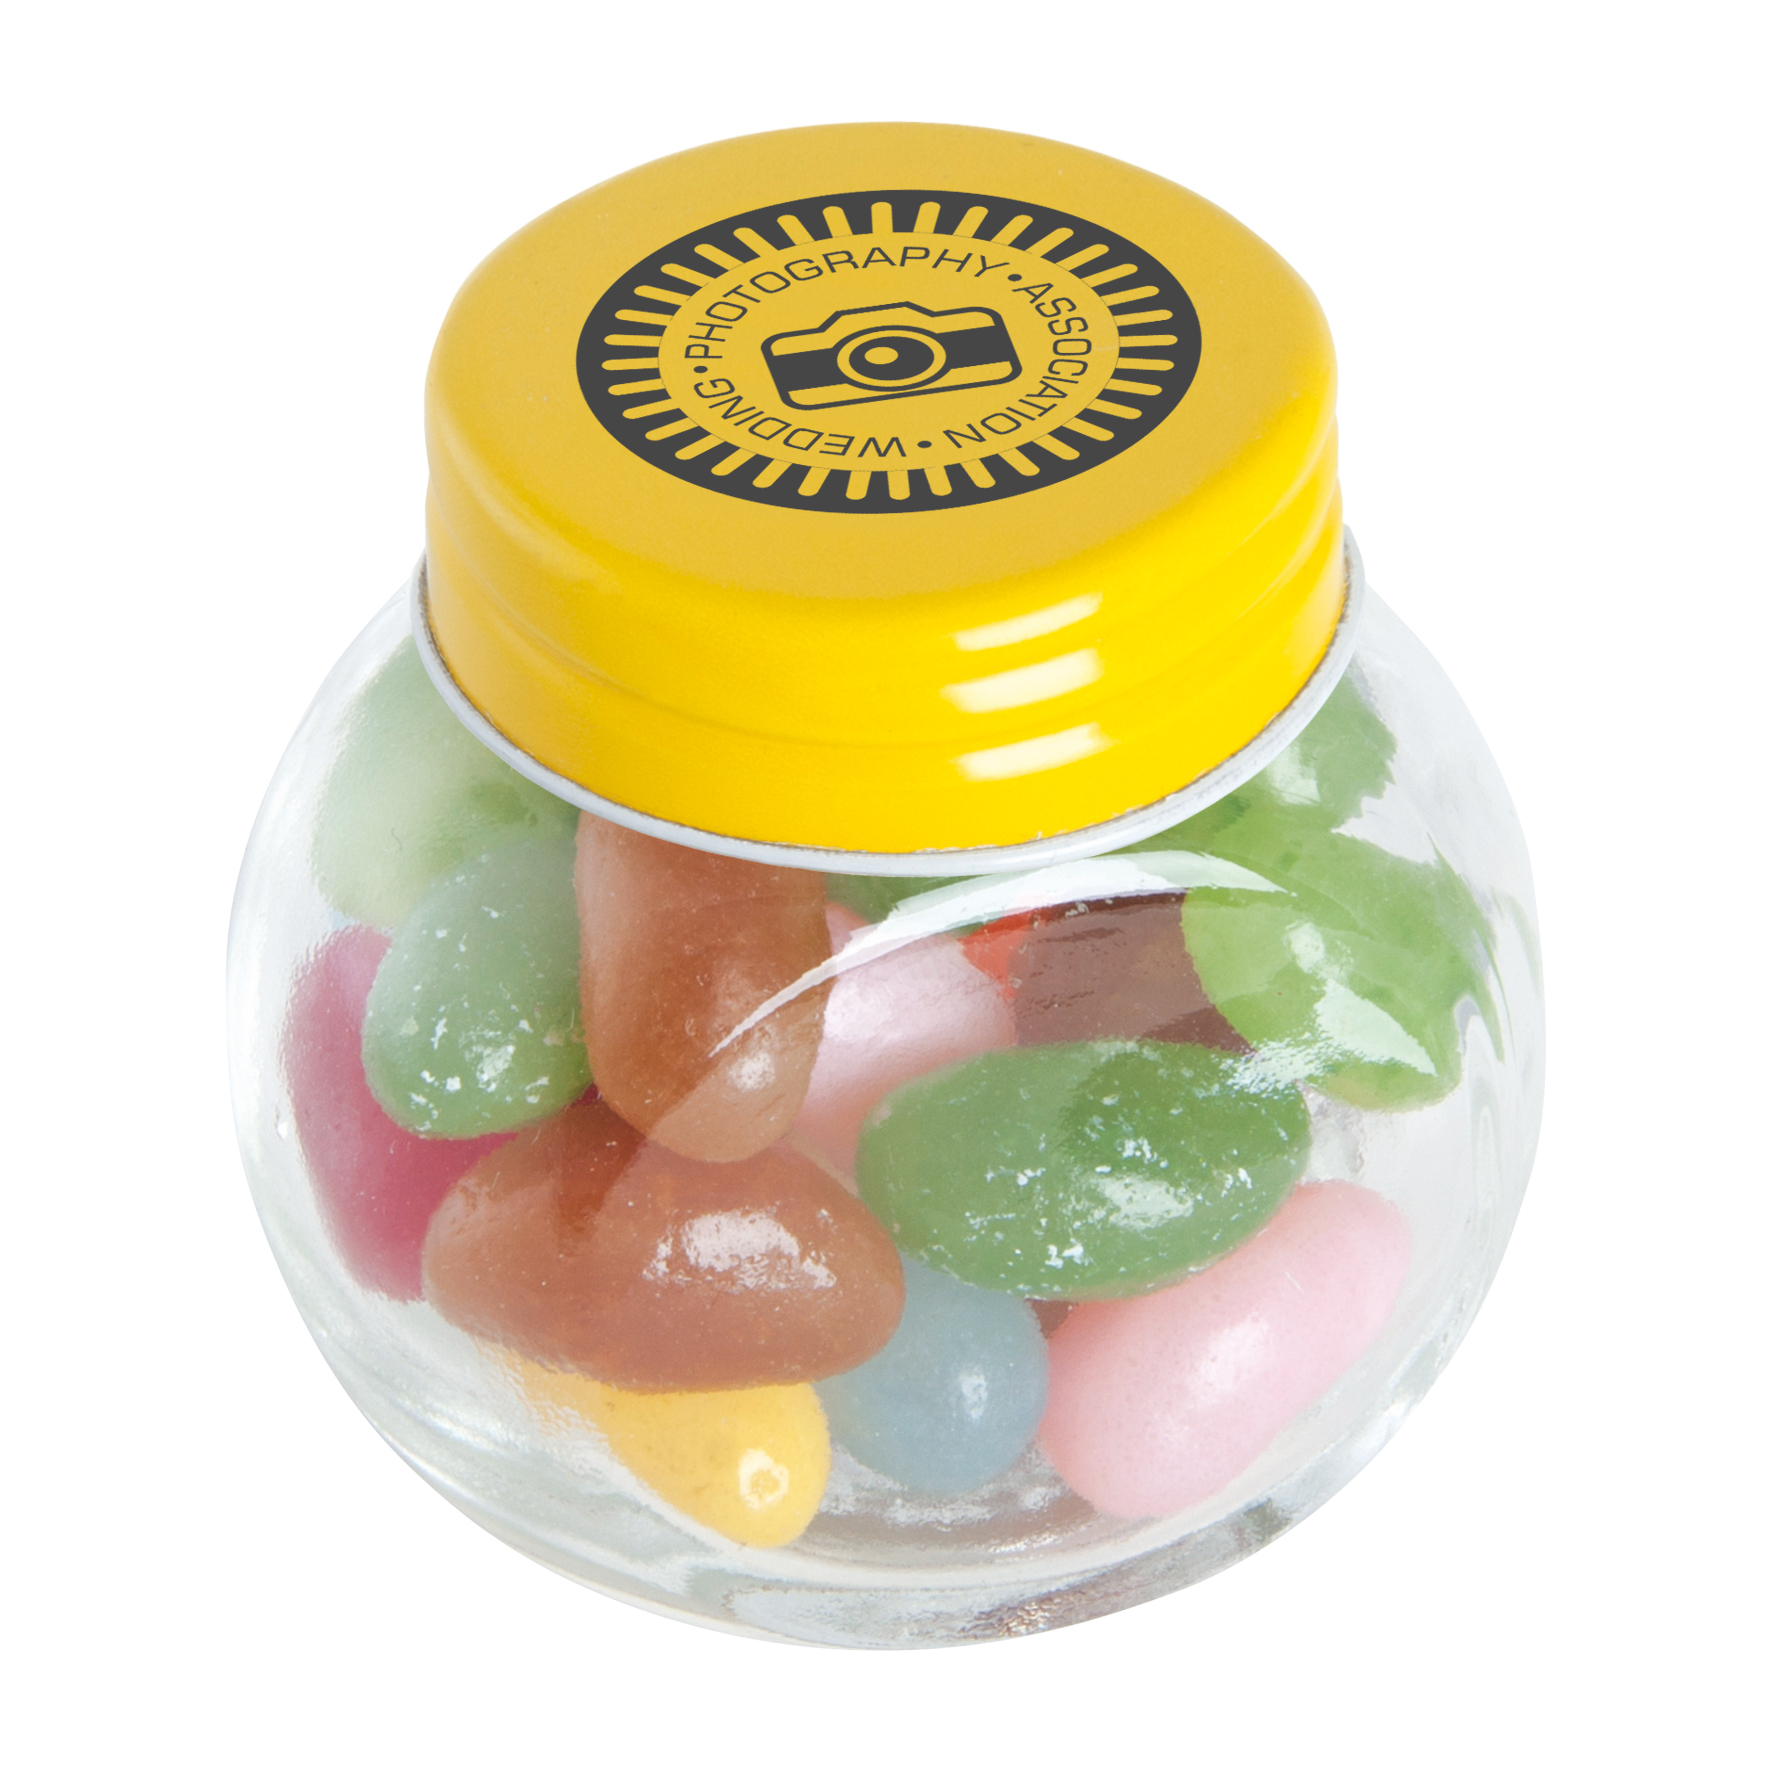 c 0163jb 06 09 - Small glass jar with jelly beans